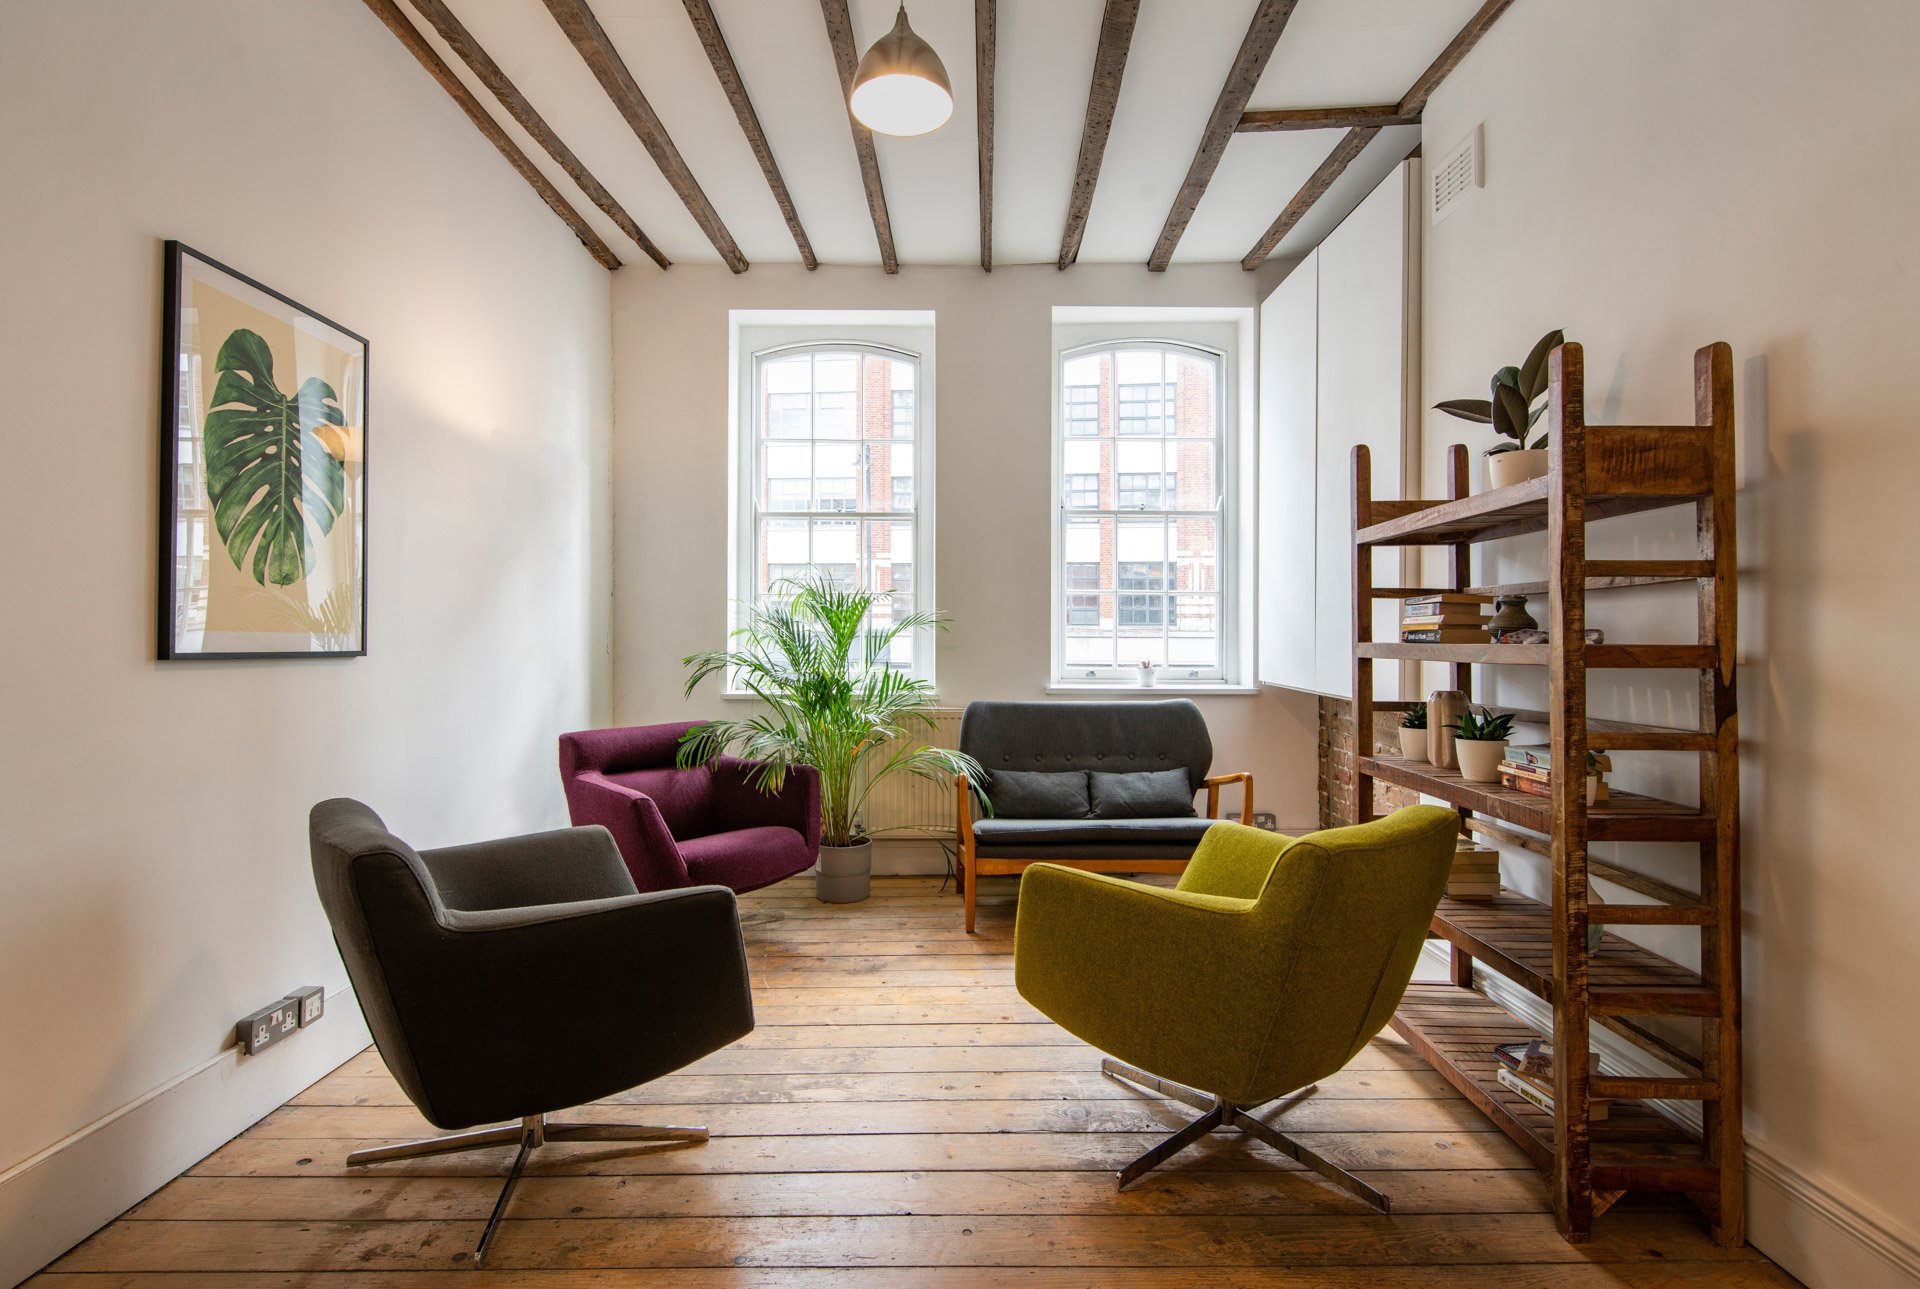 Interior of Canvas Offices - Shoreditch High Street